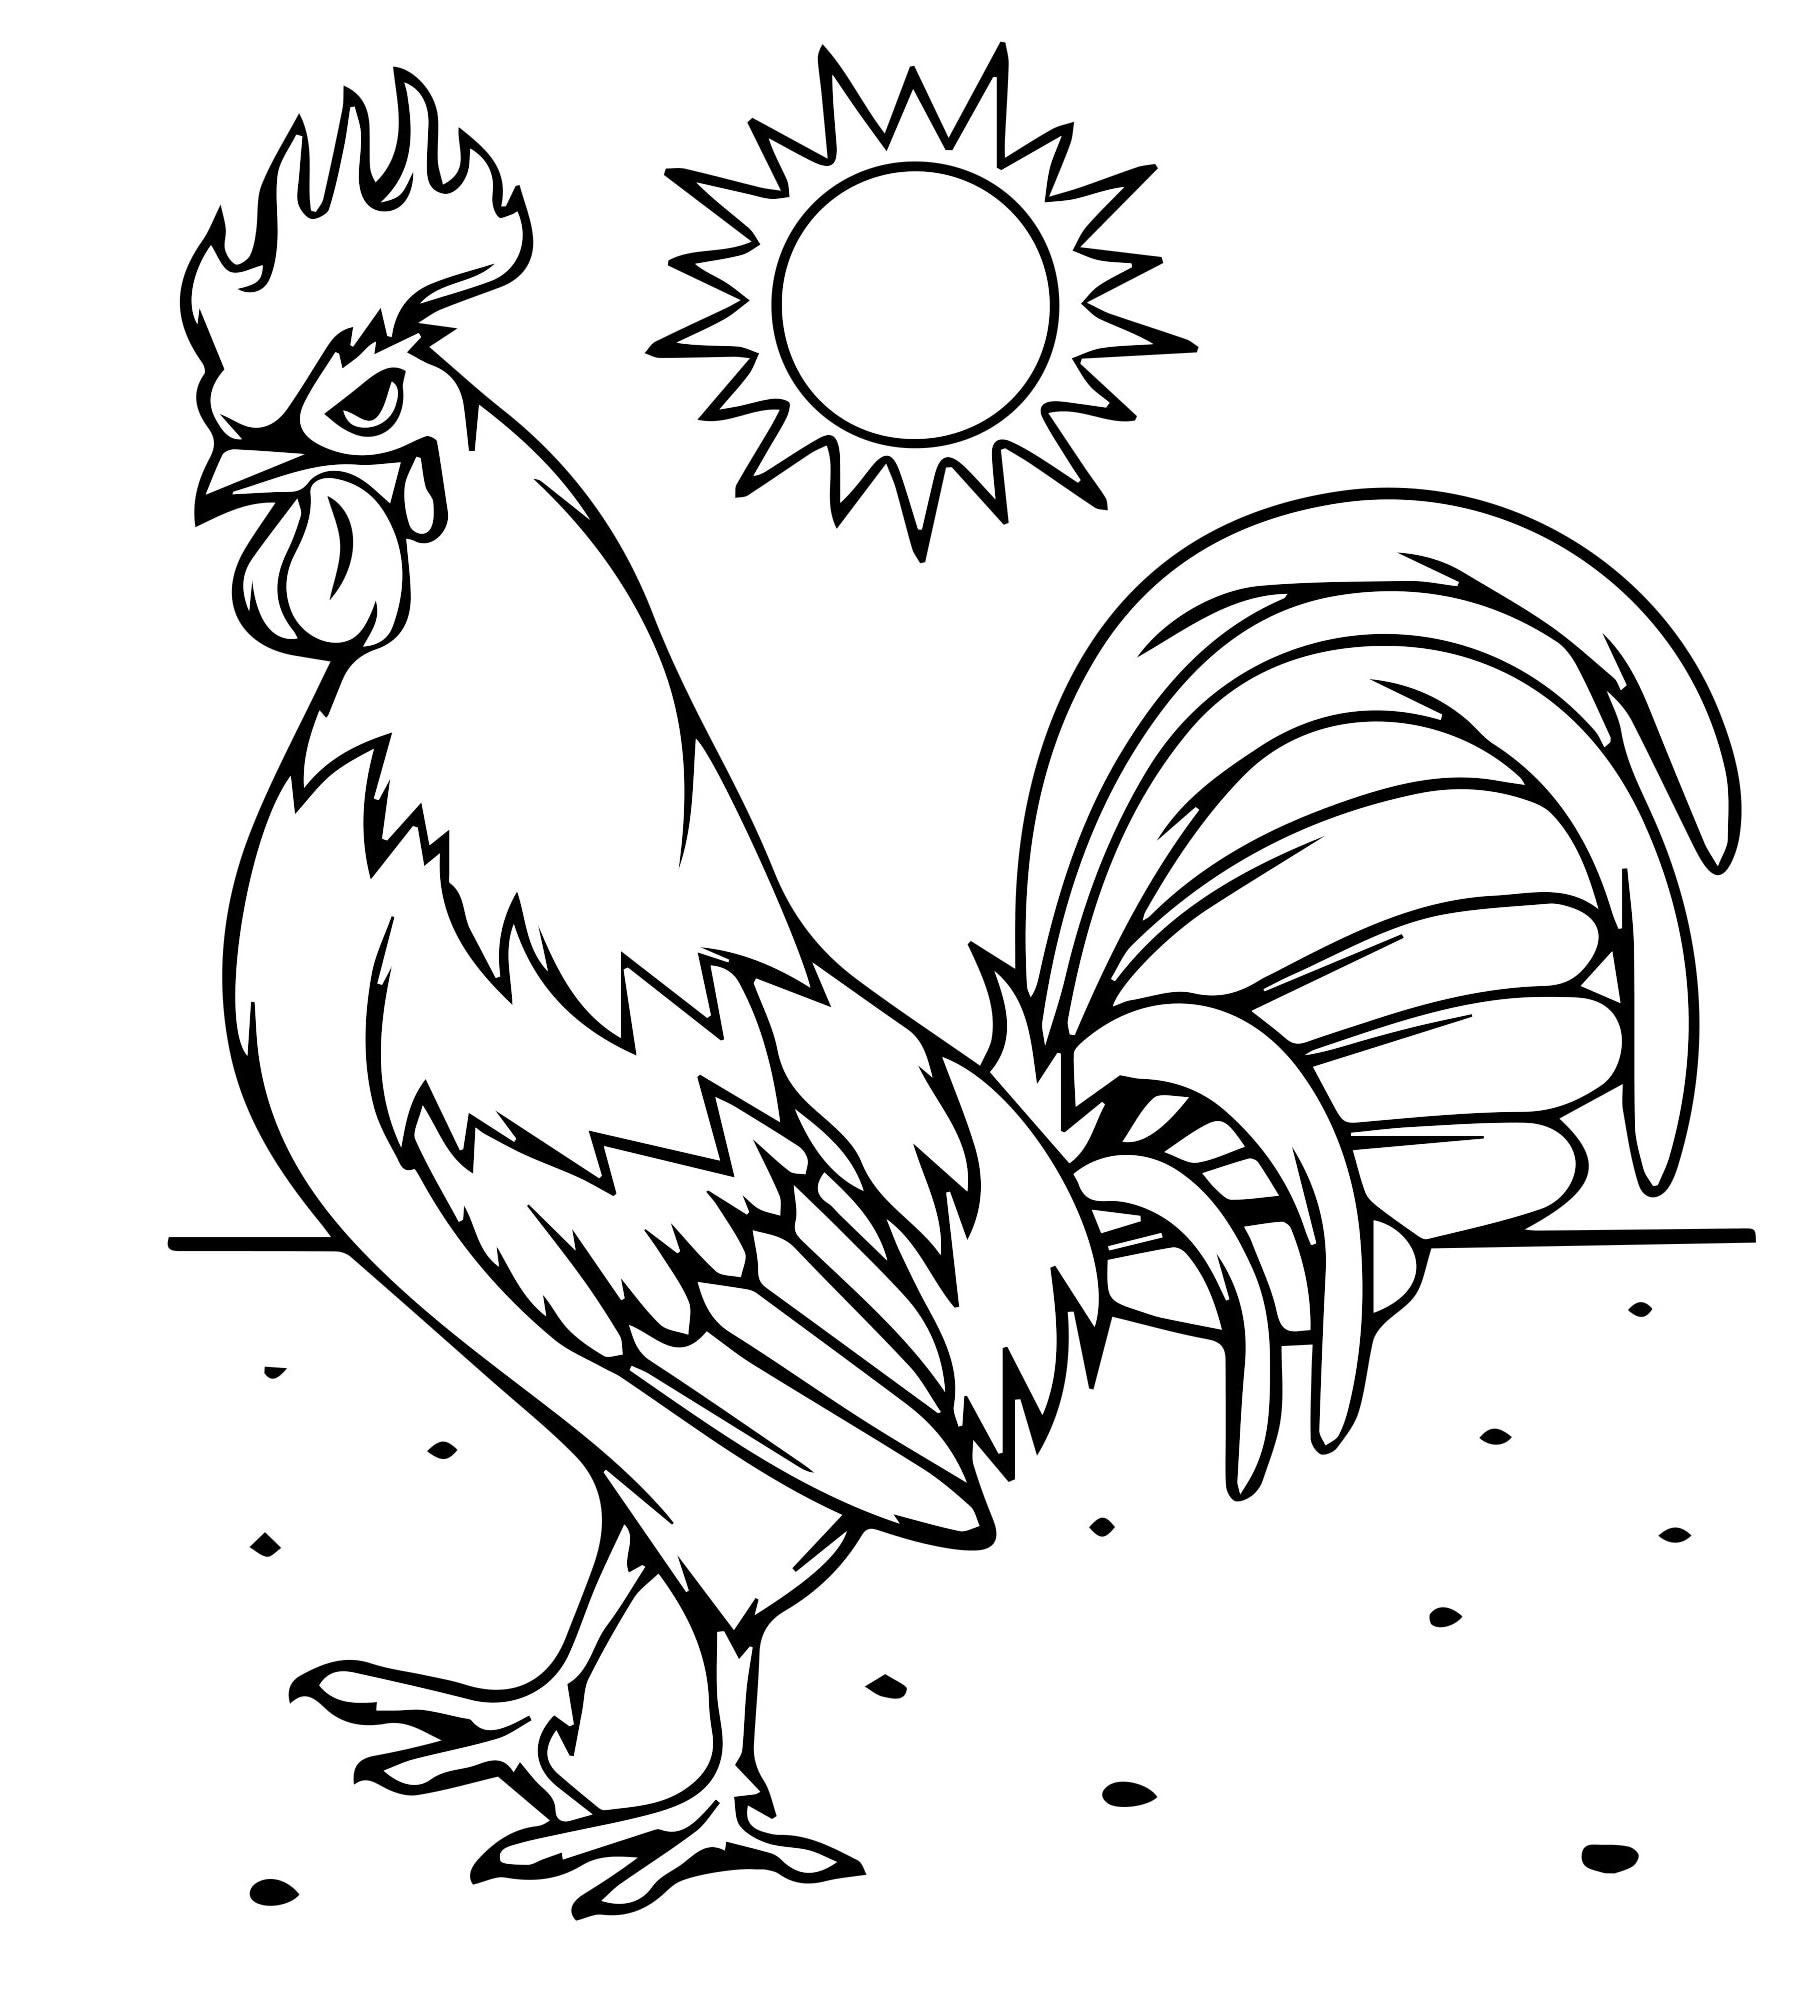 Brave rooster coloring page for kids